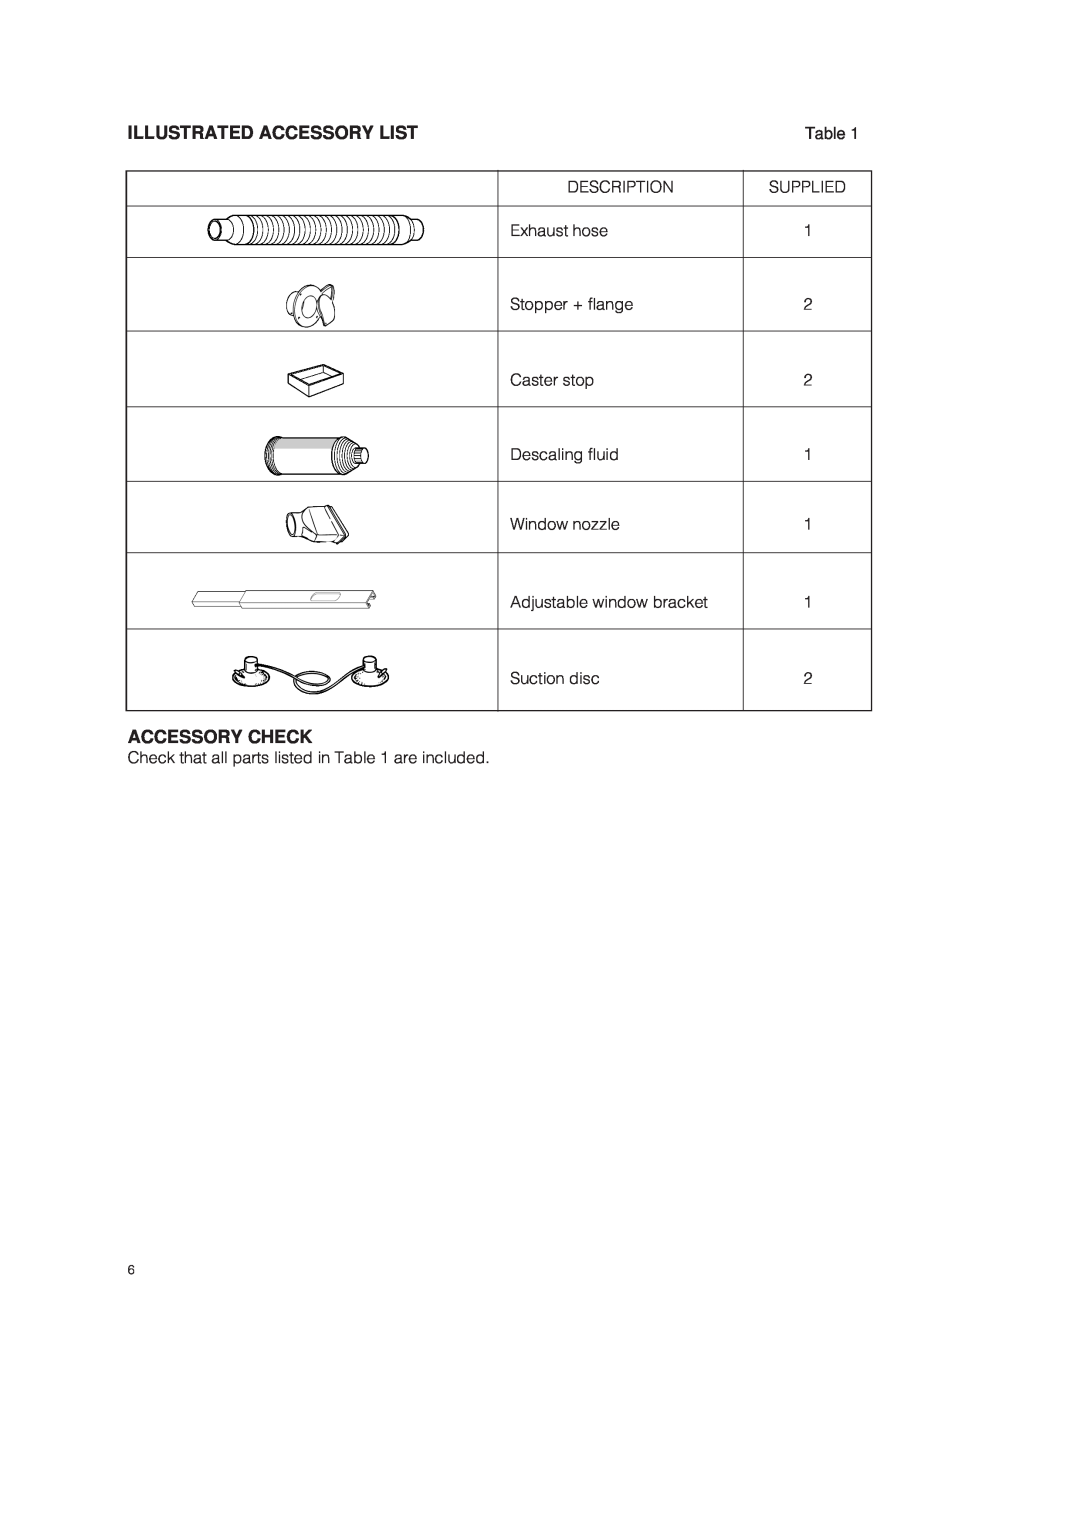 DeLonghi PAC 250 U owner manual Illustrated Accessory List, Accessory Check 